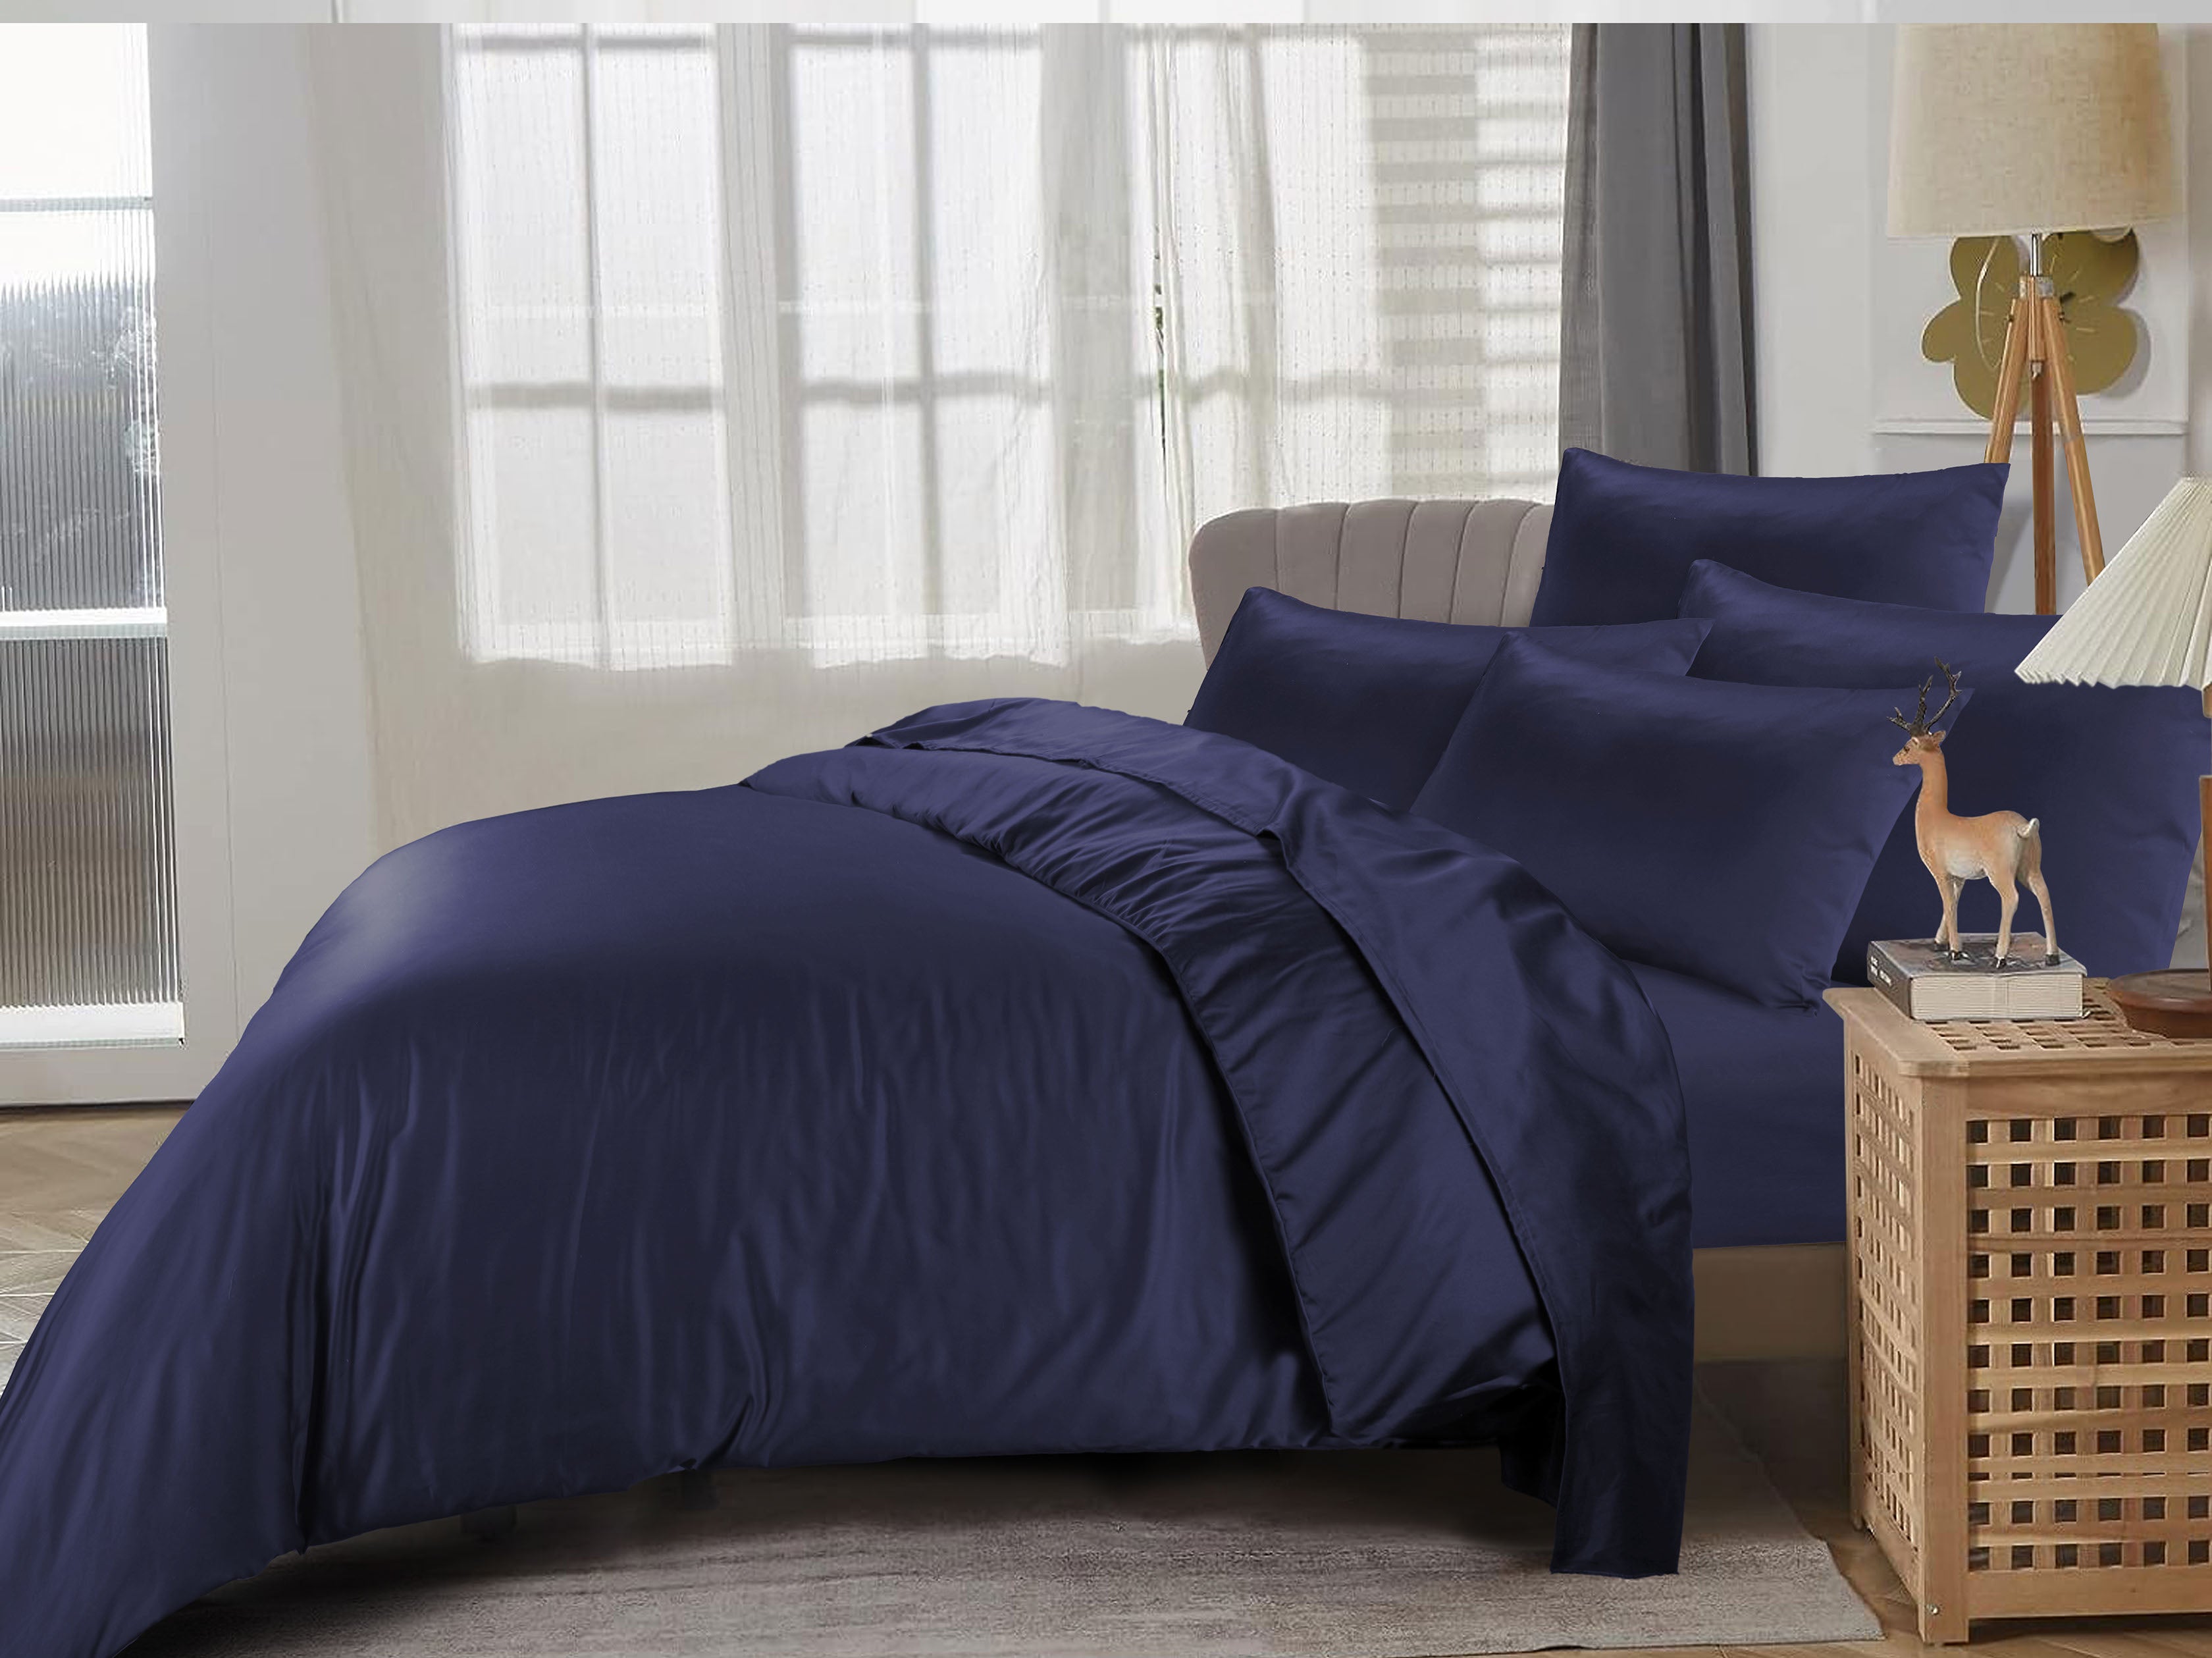 NAVY SOLID - BED IN A BAG - DAHOME TEXTILES